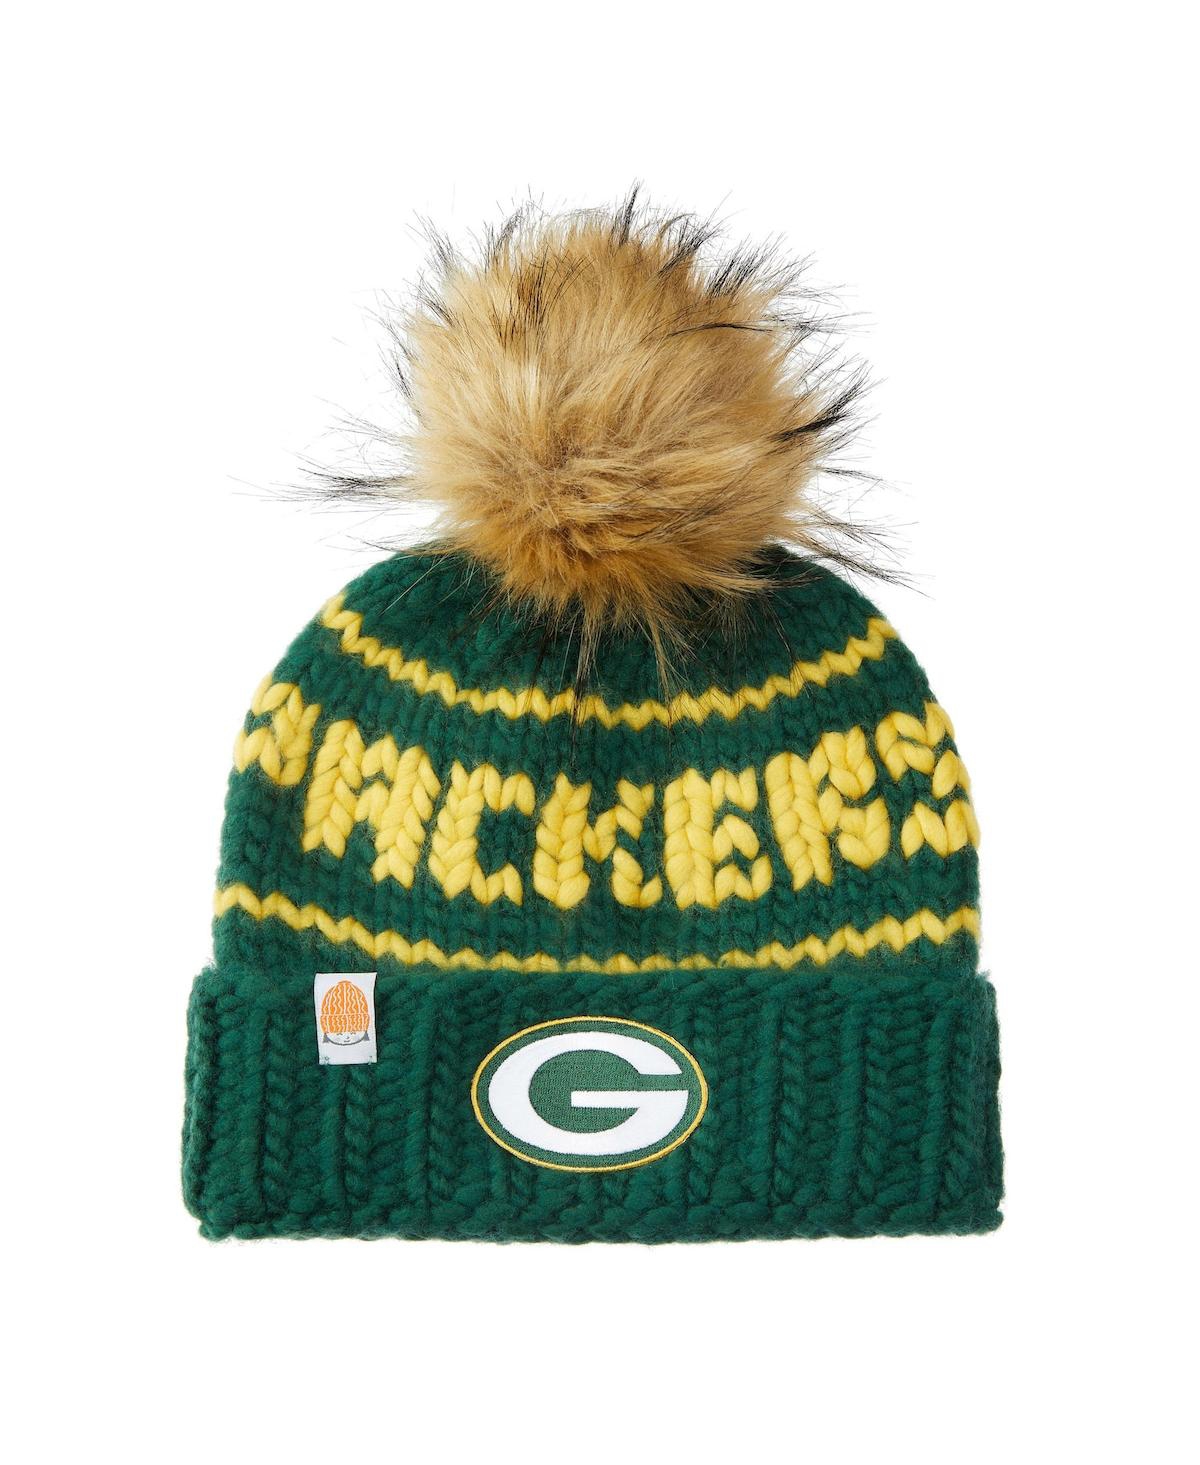 Sh*t That I Knit Women's Sh*t That I Knit Green Green Bay Packers Hand-Knit Brimmed Merino Wool Beanie with Faux Fur Pom Pom - Green